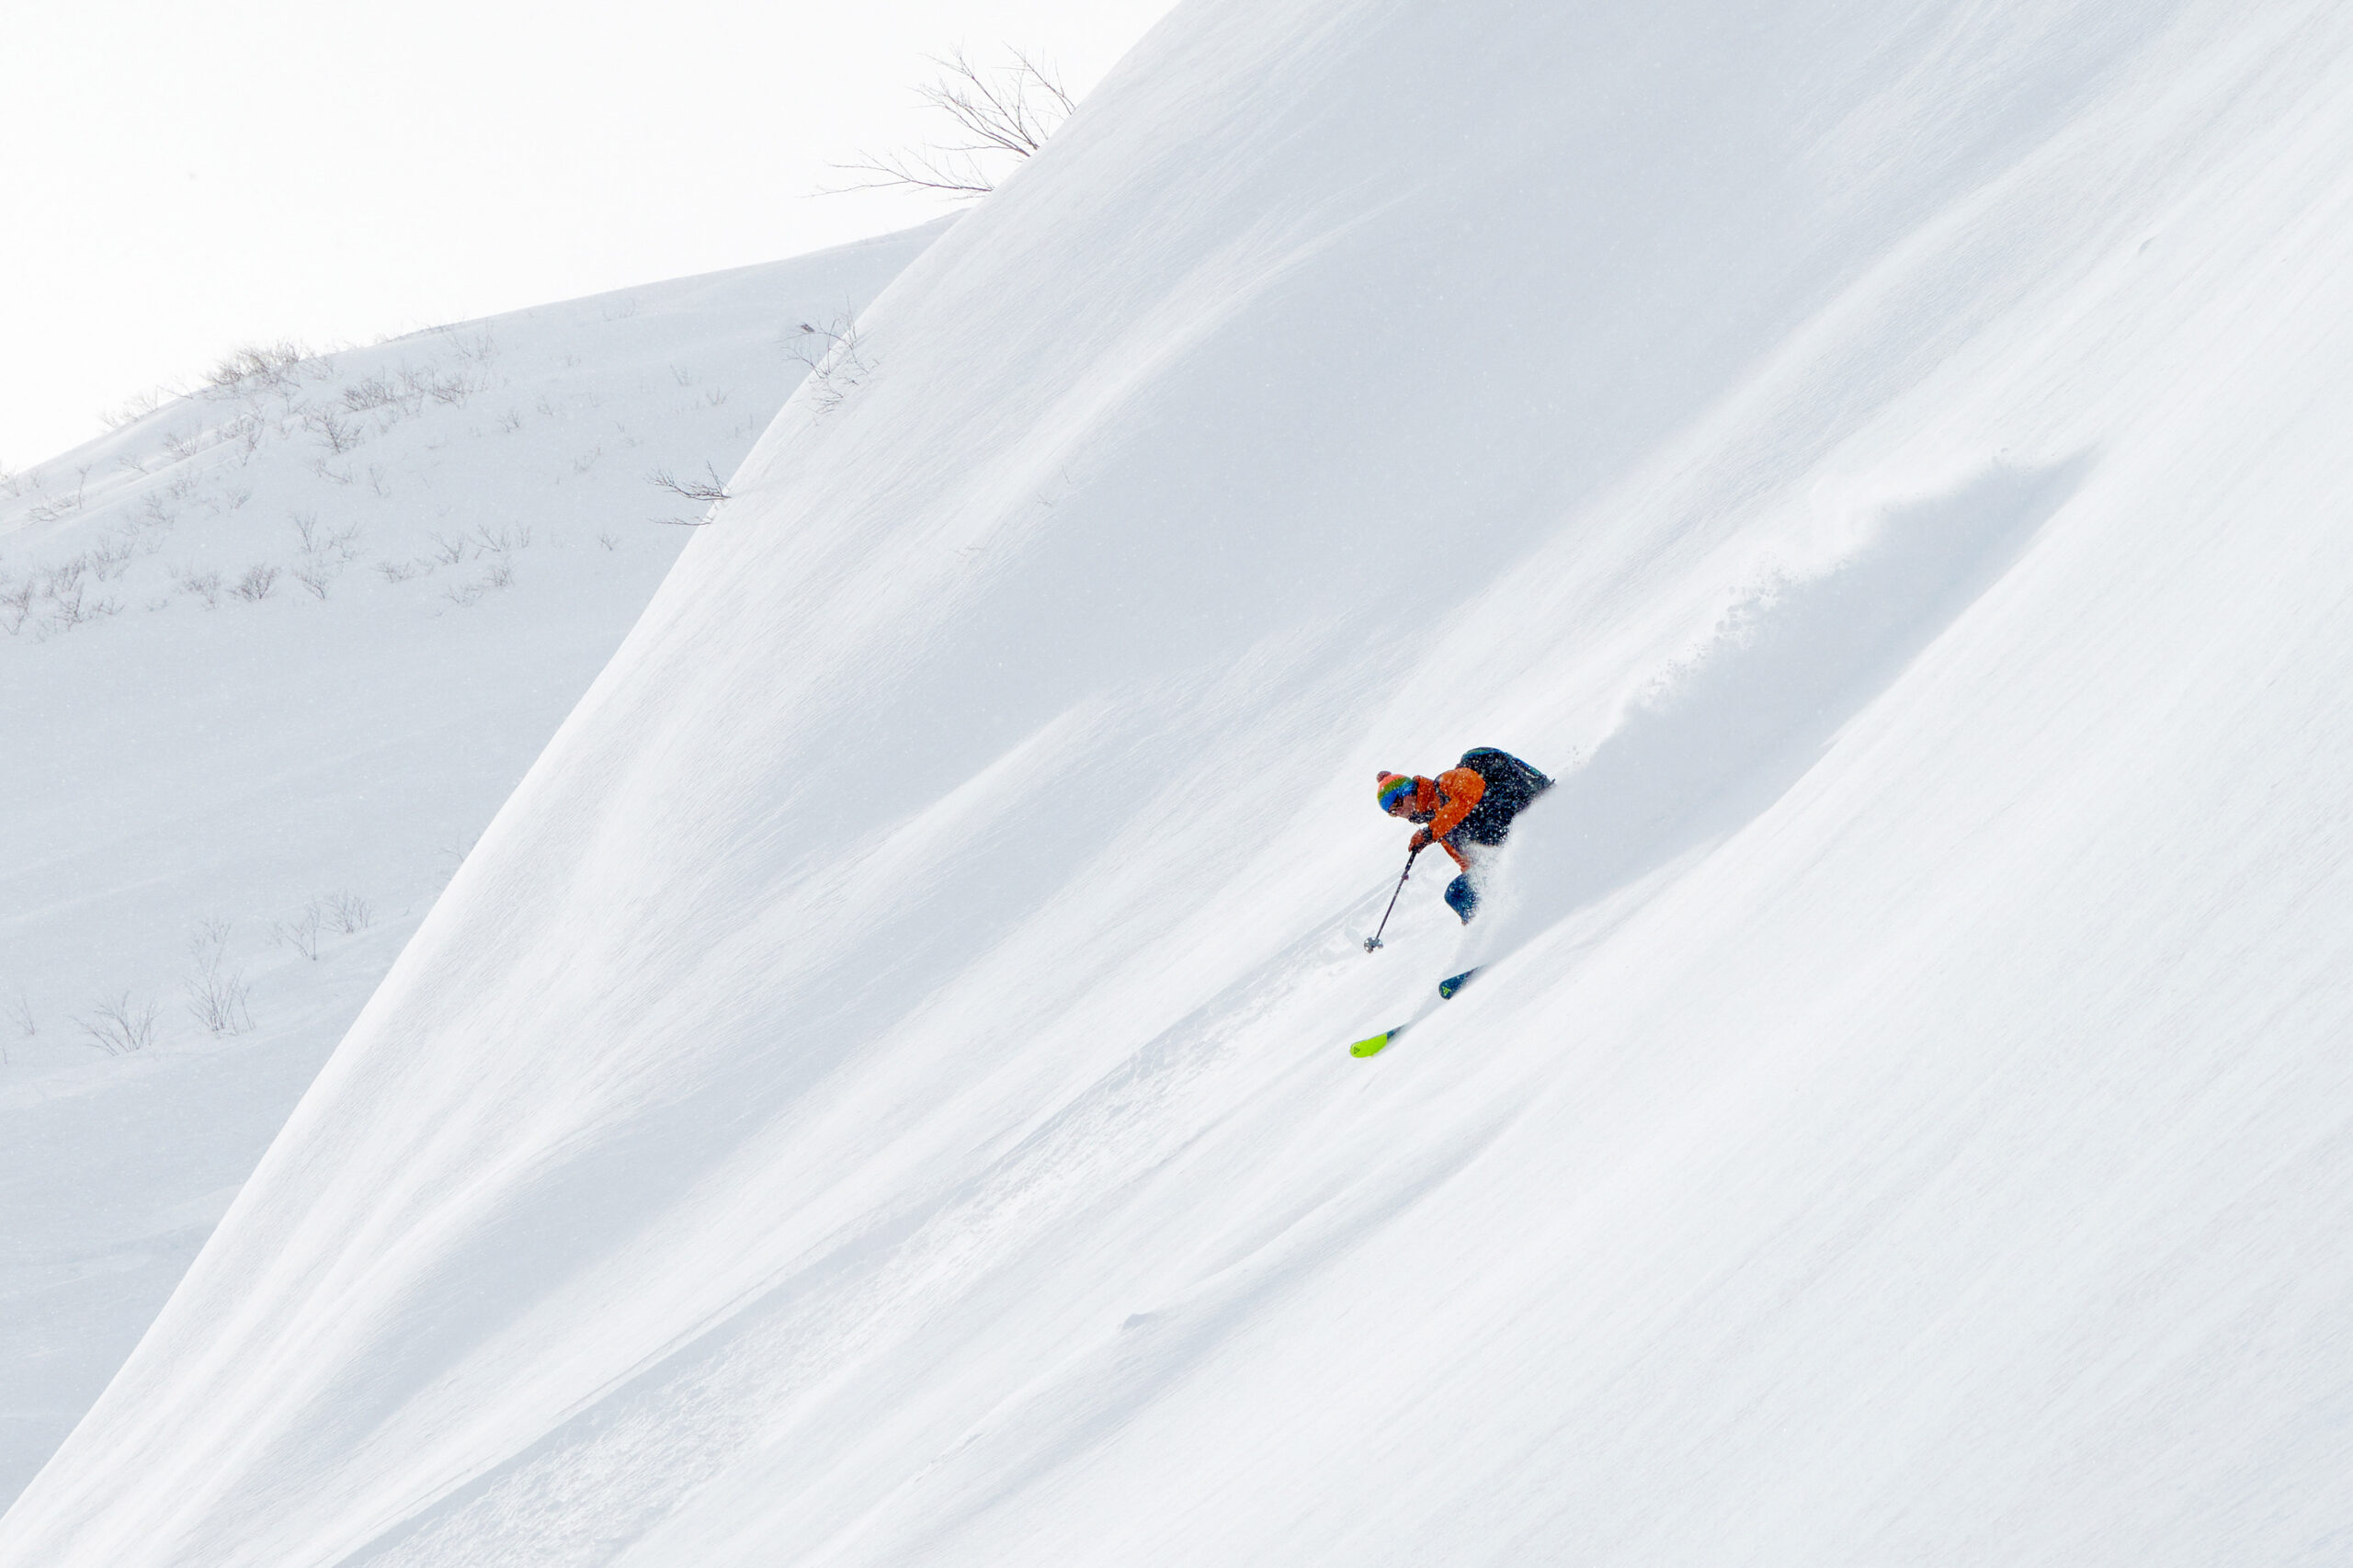 A pristine slope, not a tree in sight, as a skier descends on beautiful light Japow